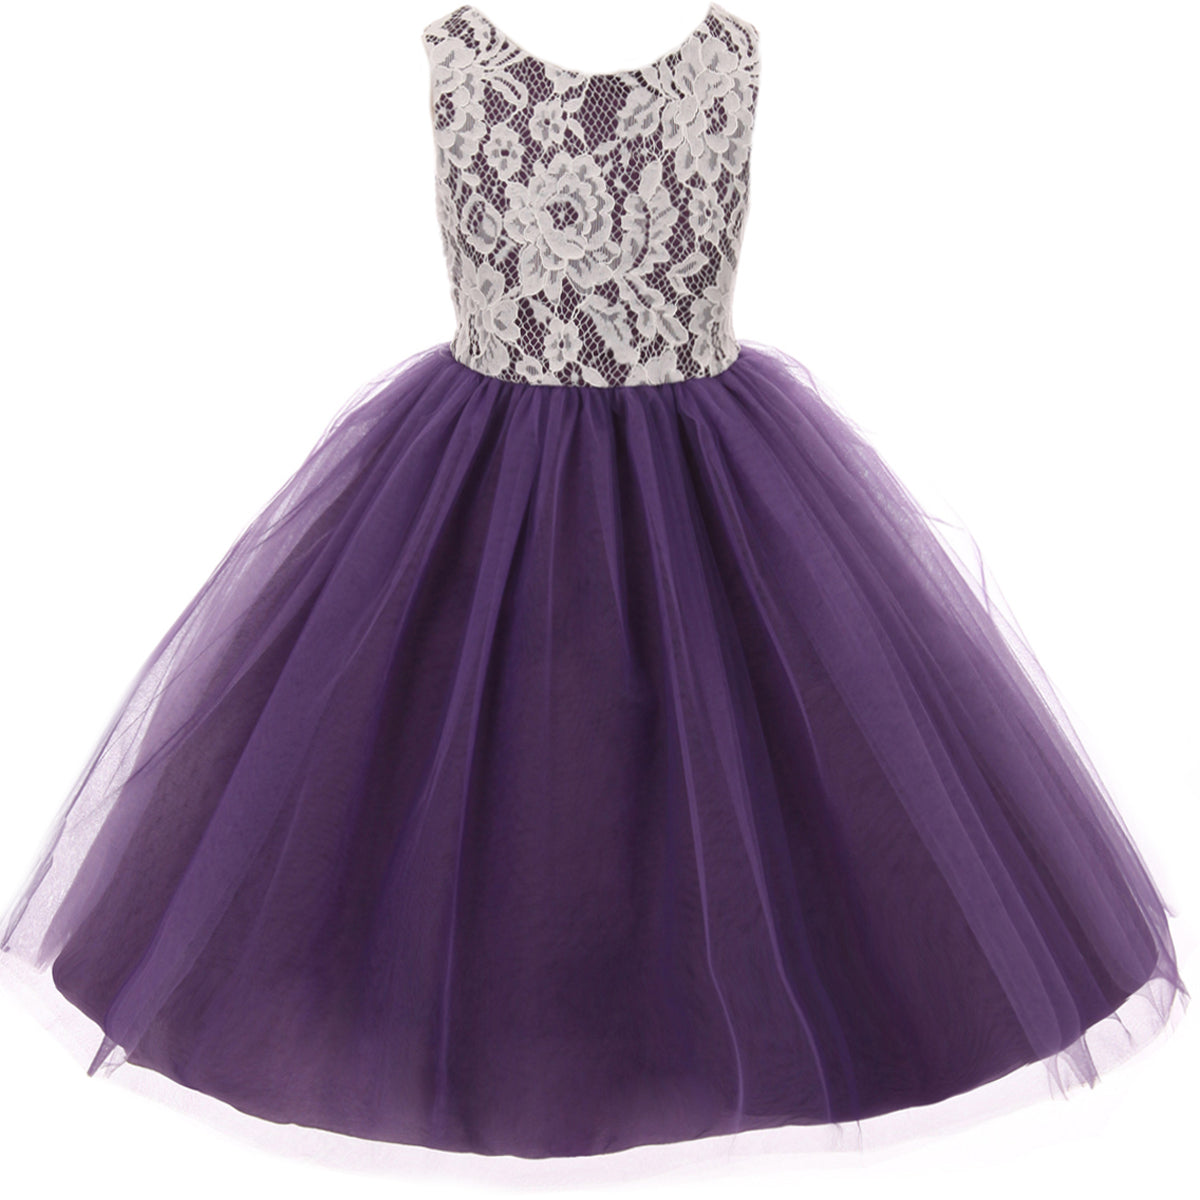 LACE BODICE WITH FOUR LAYERS ILLLUSION TULLE SKIRT